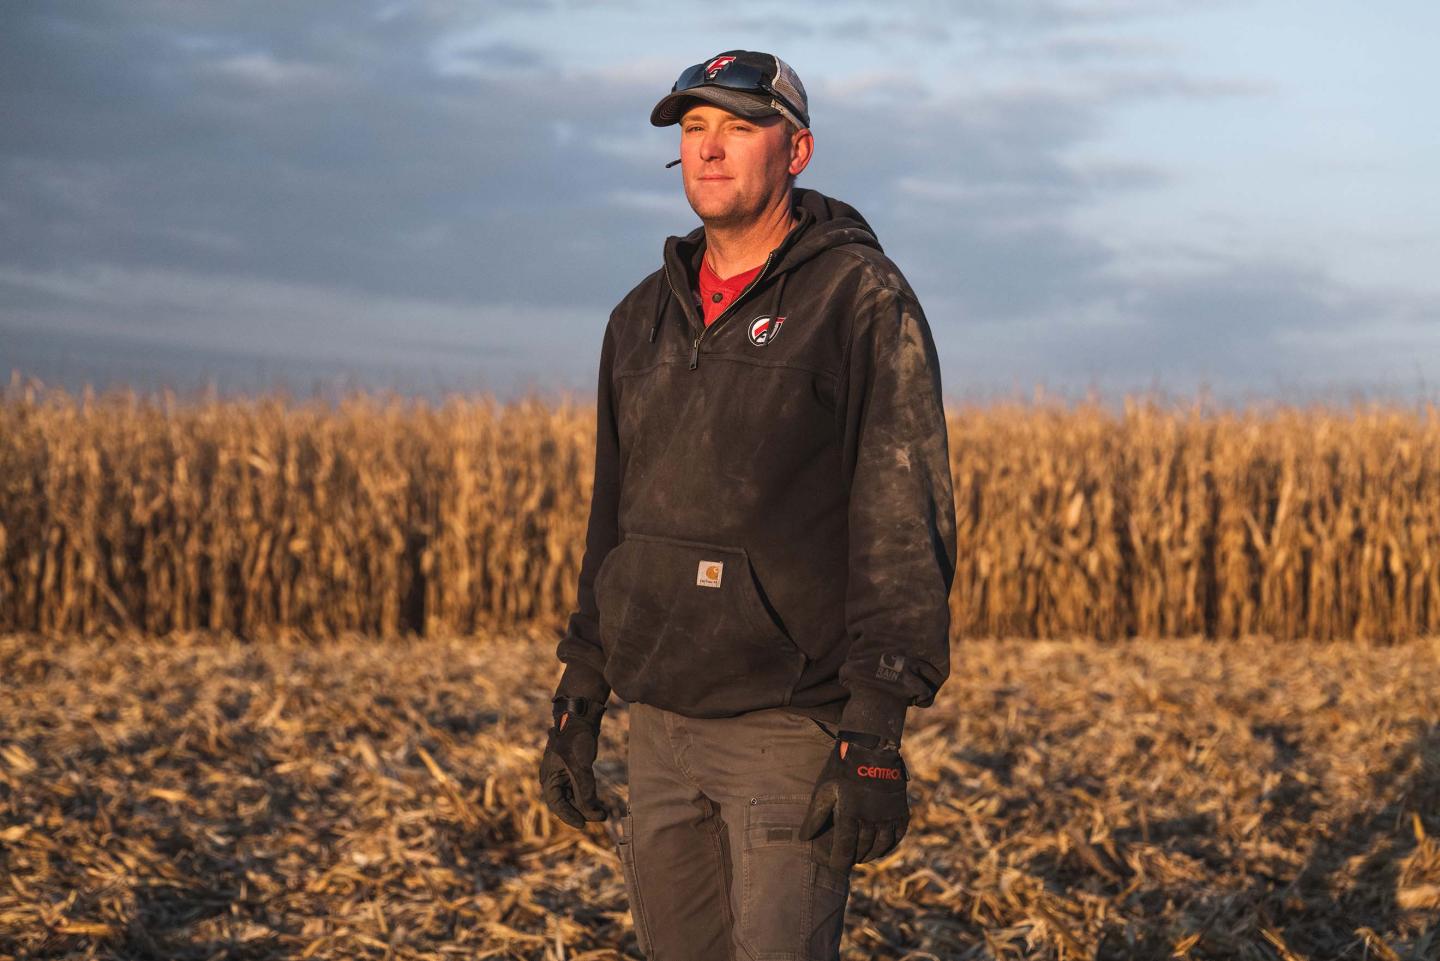 Shawn Feikema is a third-generation farmer who operates a 7,000-acre row crop and cattle operation in Luverne, Minnesota, along with his uncles and his brother. (Photo Courtesy of Andrew Bydlon) 